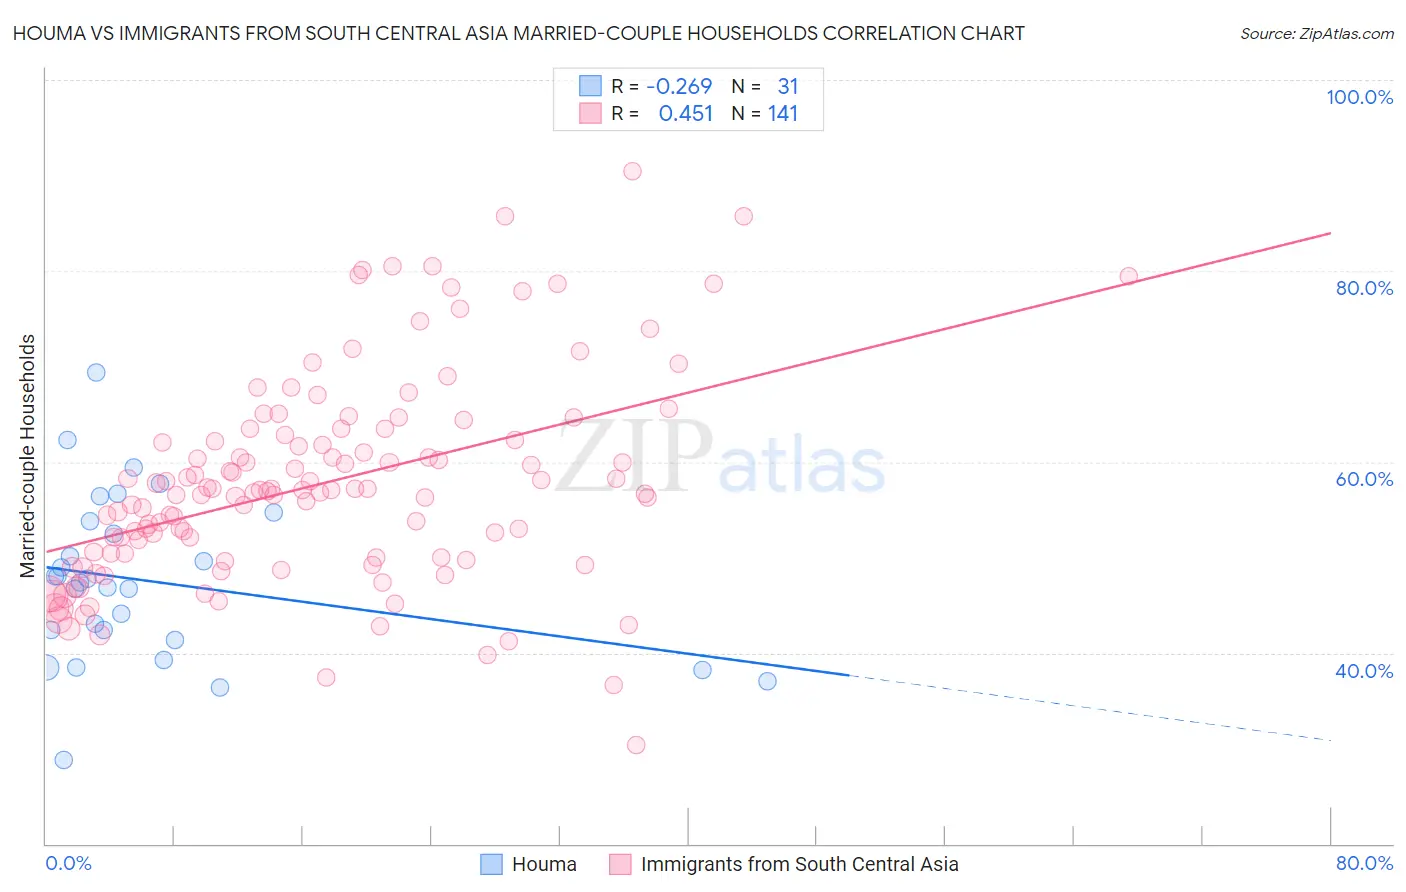 Houma vs Immigrants from South Central Asia Married-couple Households